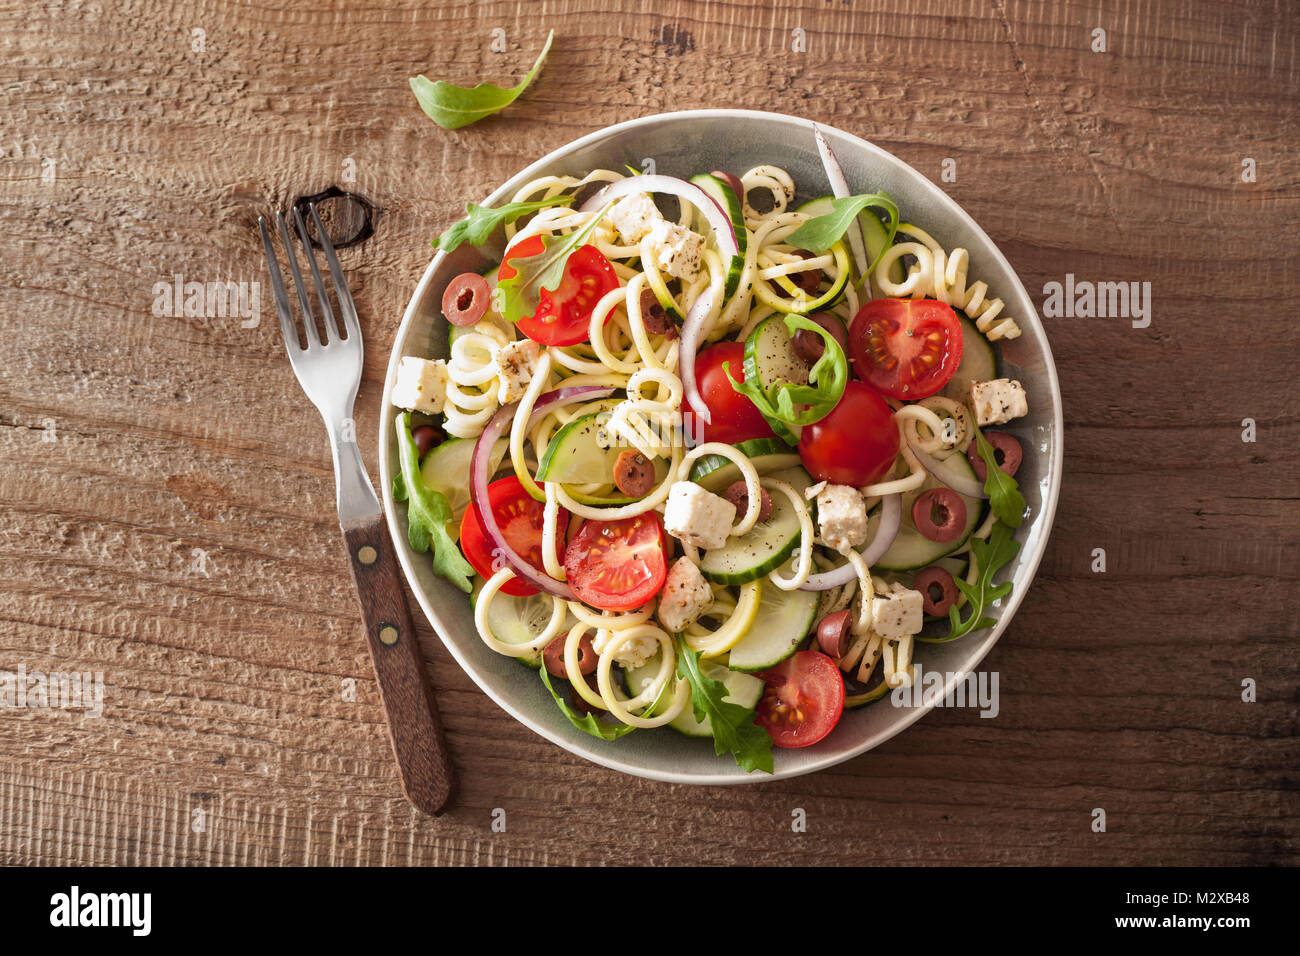 spiralized courgette salad greek style with tomato feta olives cucumber Stock Photo